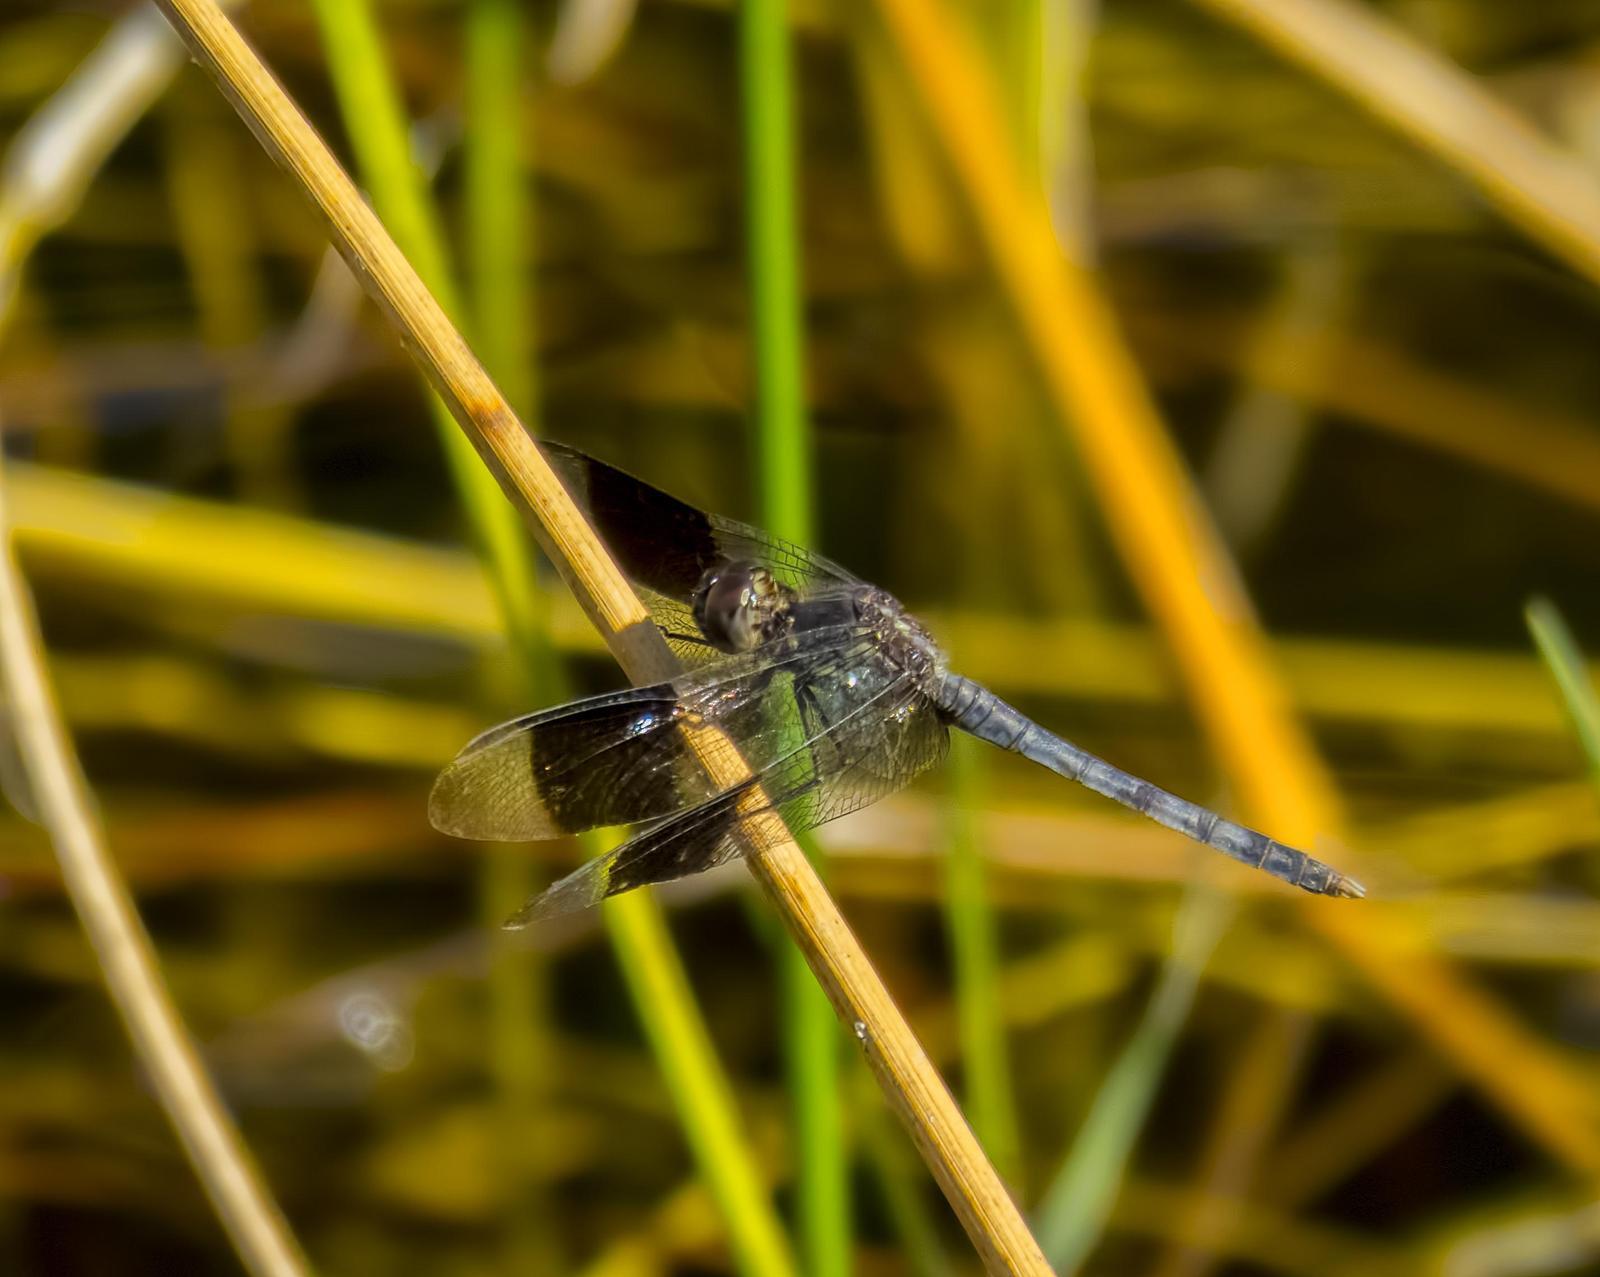 Band-winged Dragonlet Photo by Michael Moore